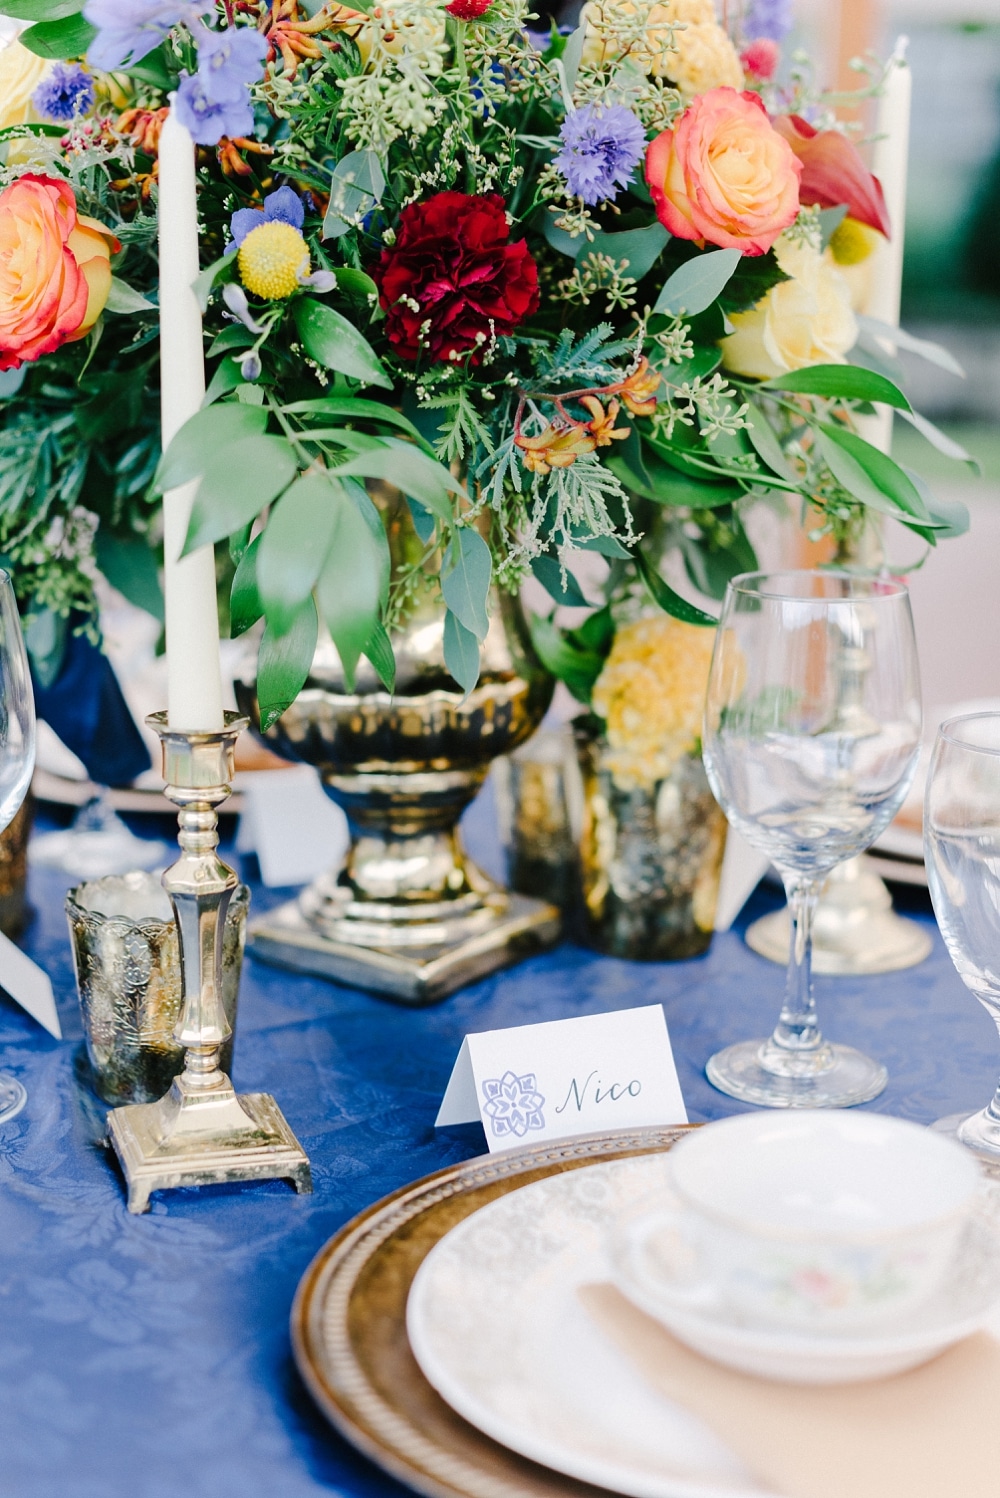 Florals table Setting and Styling by Good Earth Flowers 